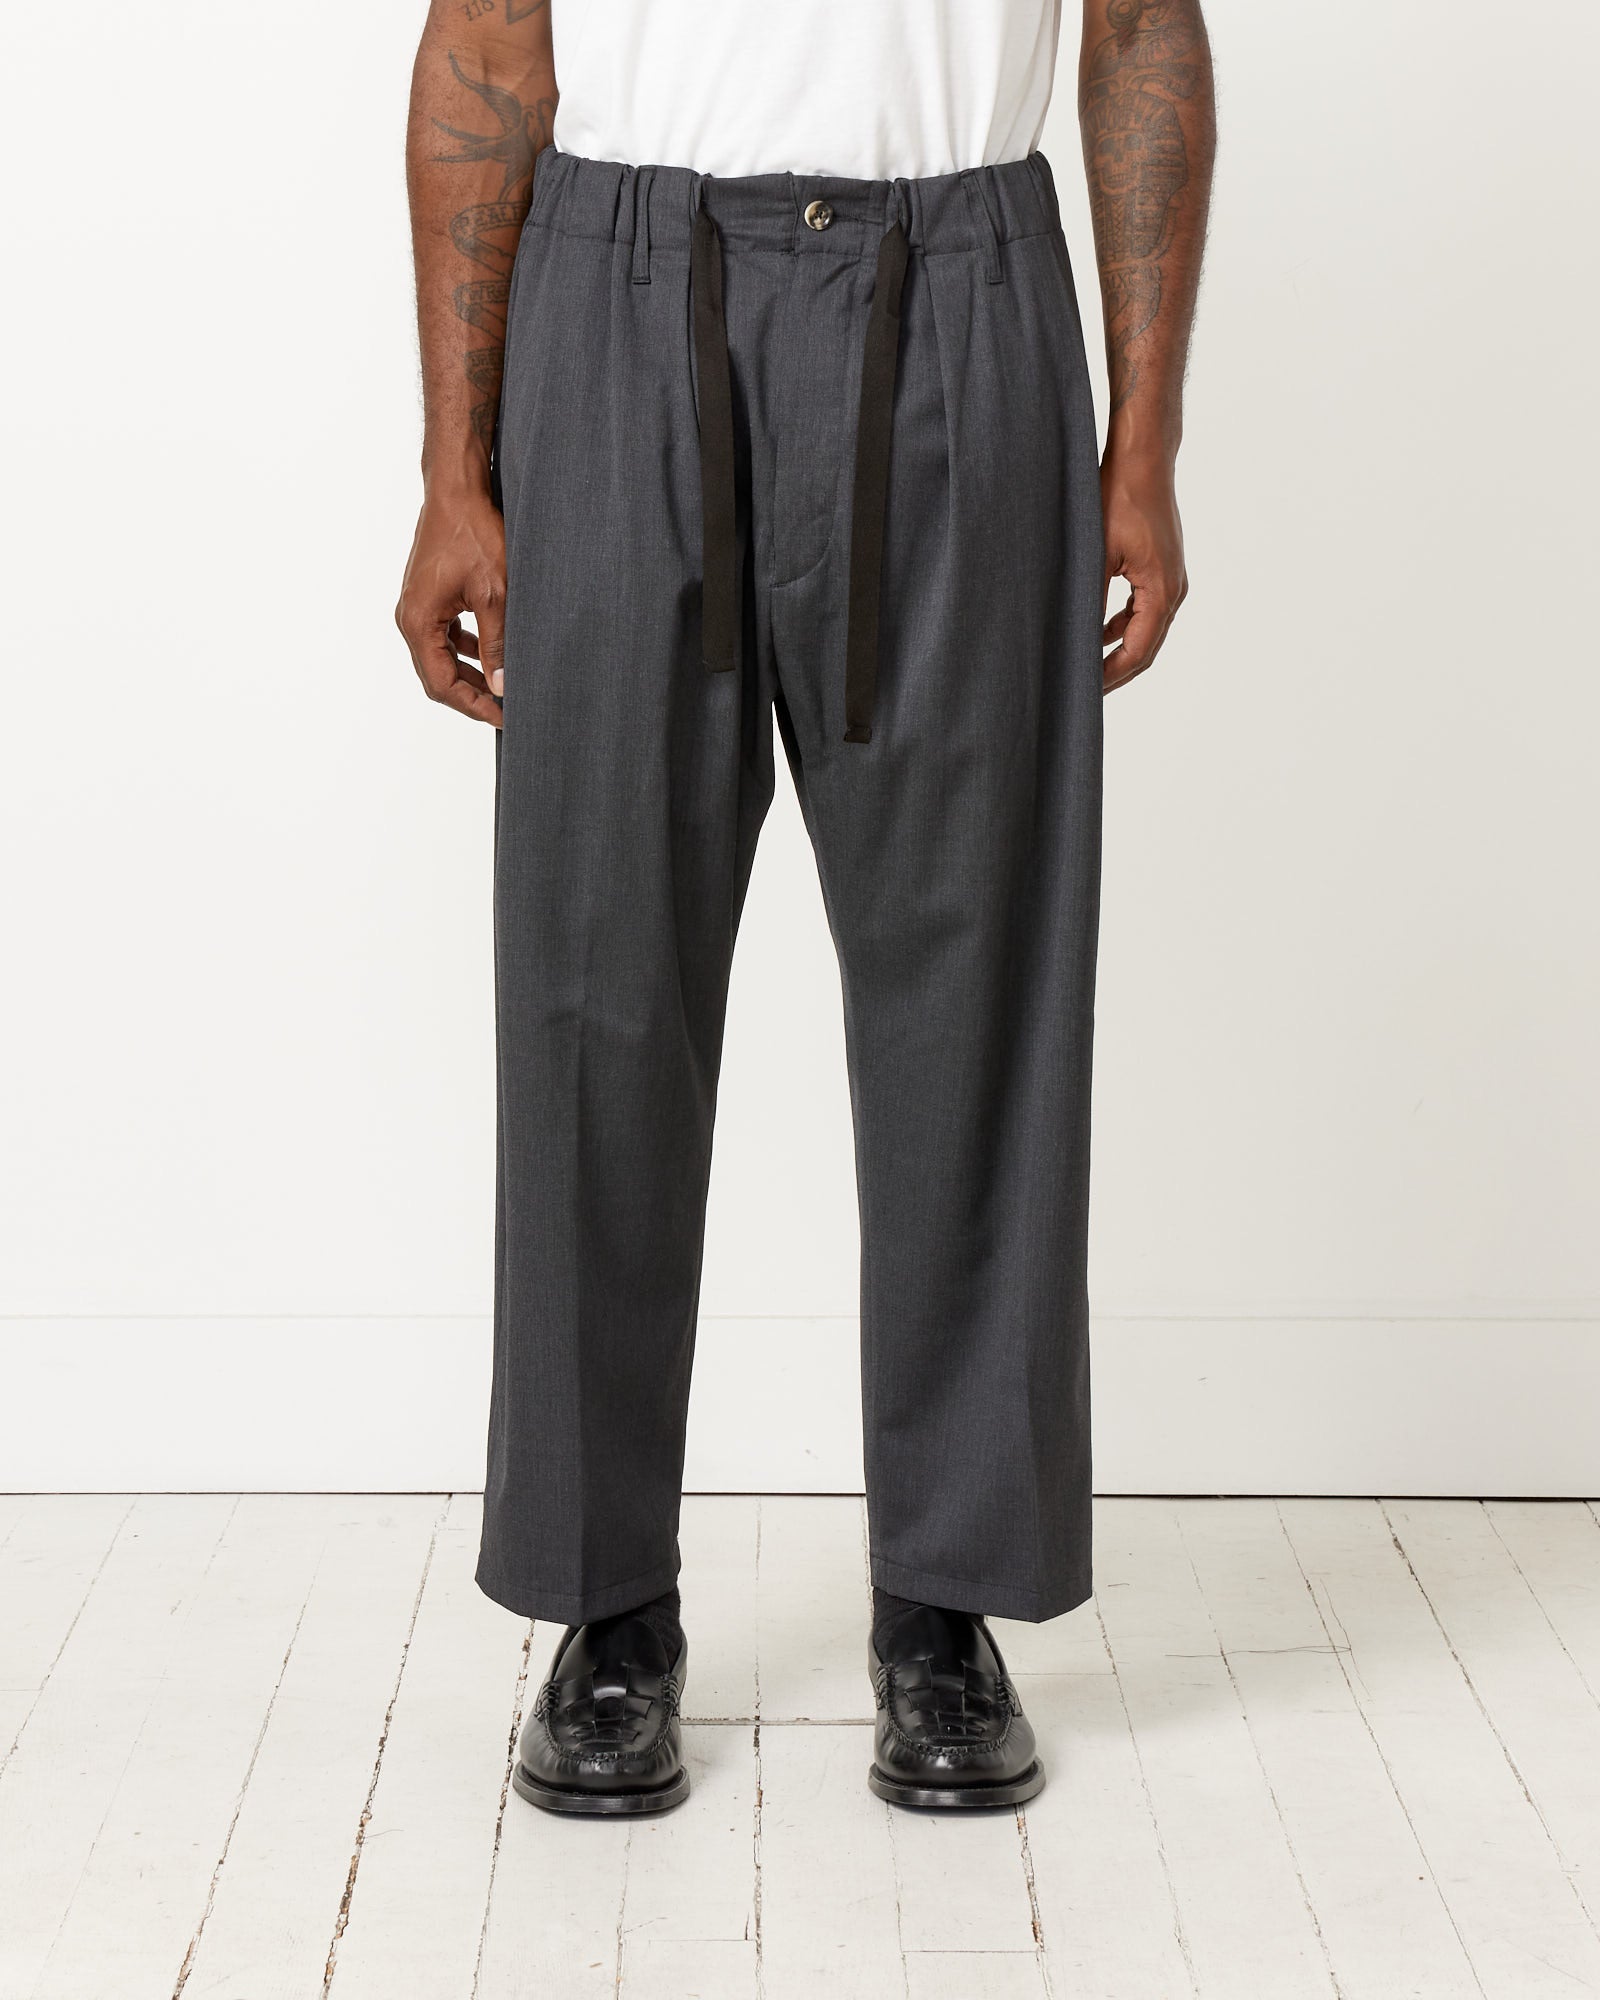 Essential Baggy Trouser in Anthracite